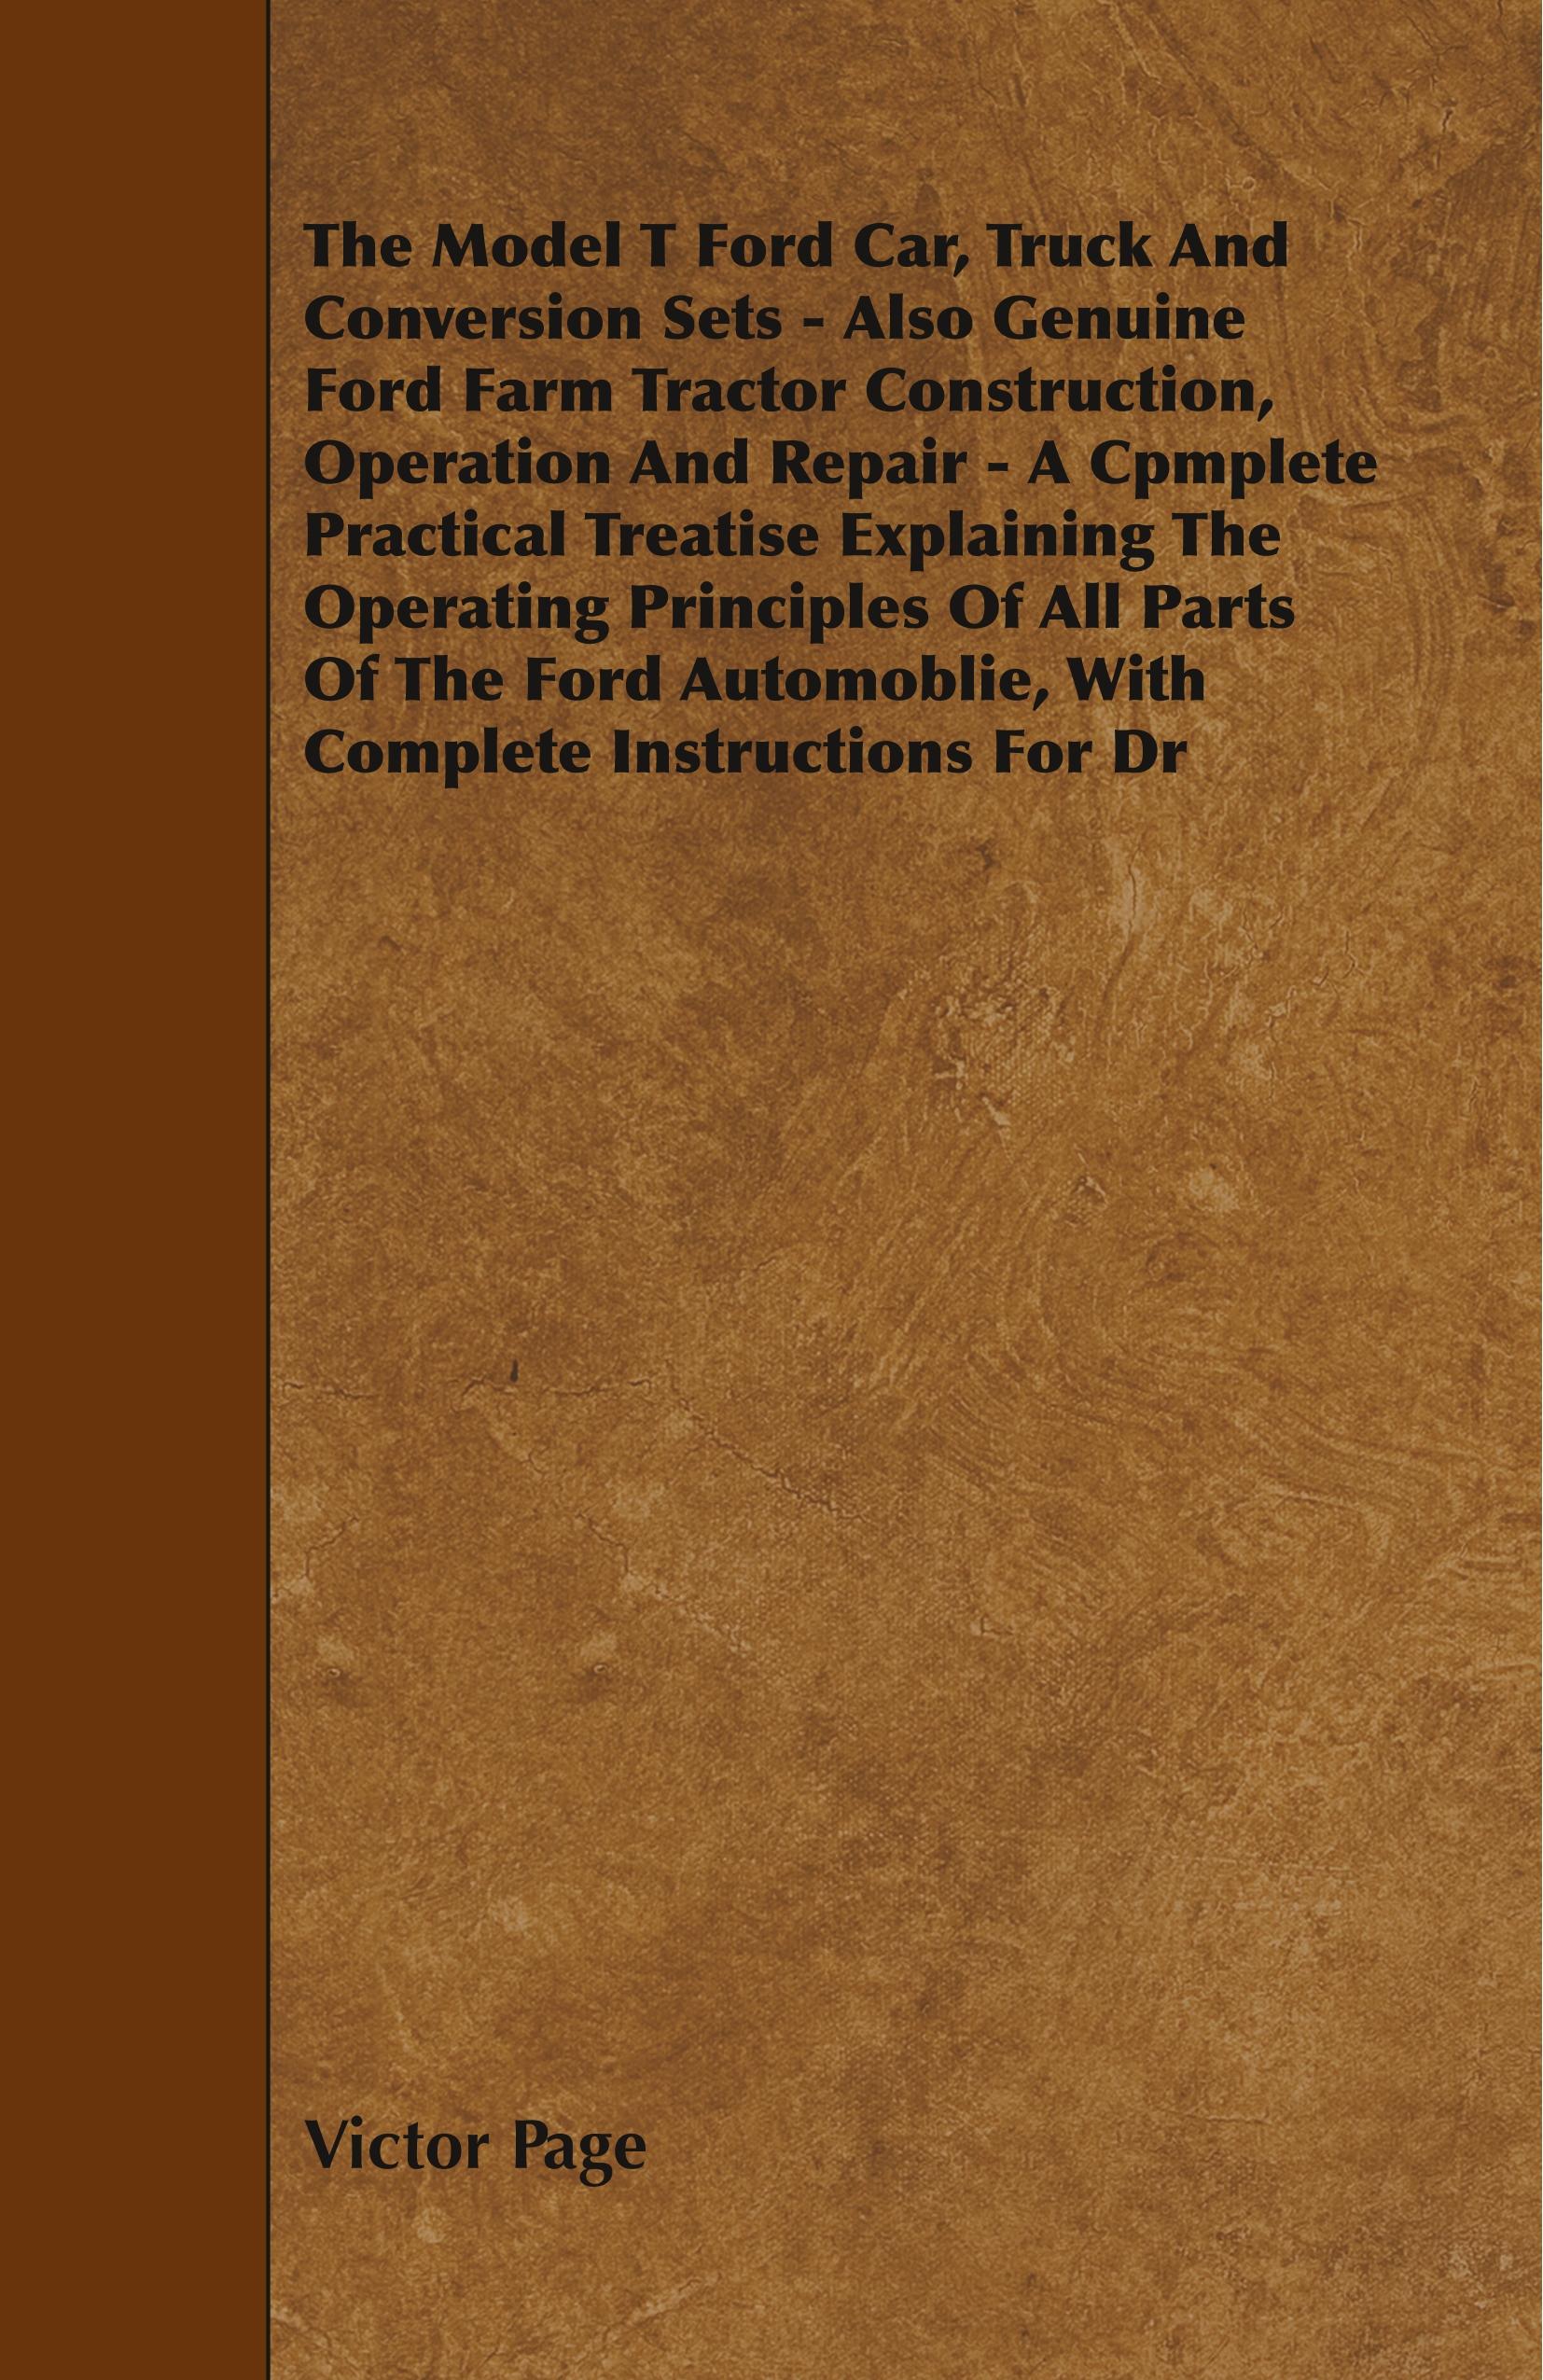 The Model T Ford Car, Truck And Conversion Sets - Also Genuine Ford Farm Tractor Construction, Operation And Repair - A Cpmplete Practical Treatise Explaining The Operating Principles Of All Parts Of The Ford Automoblie, With Complete Instructions For Dr - Page, Victor